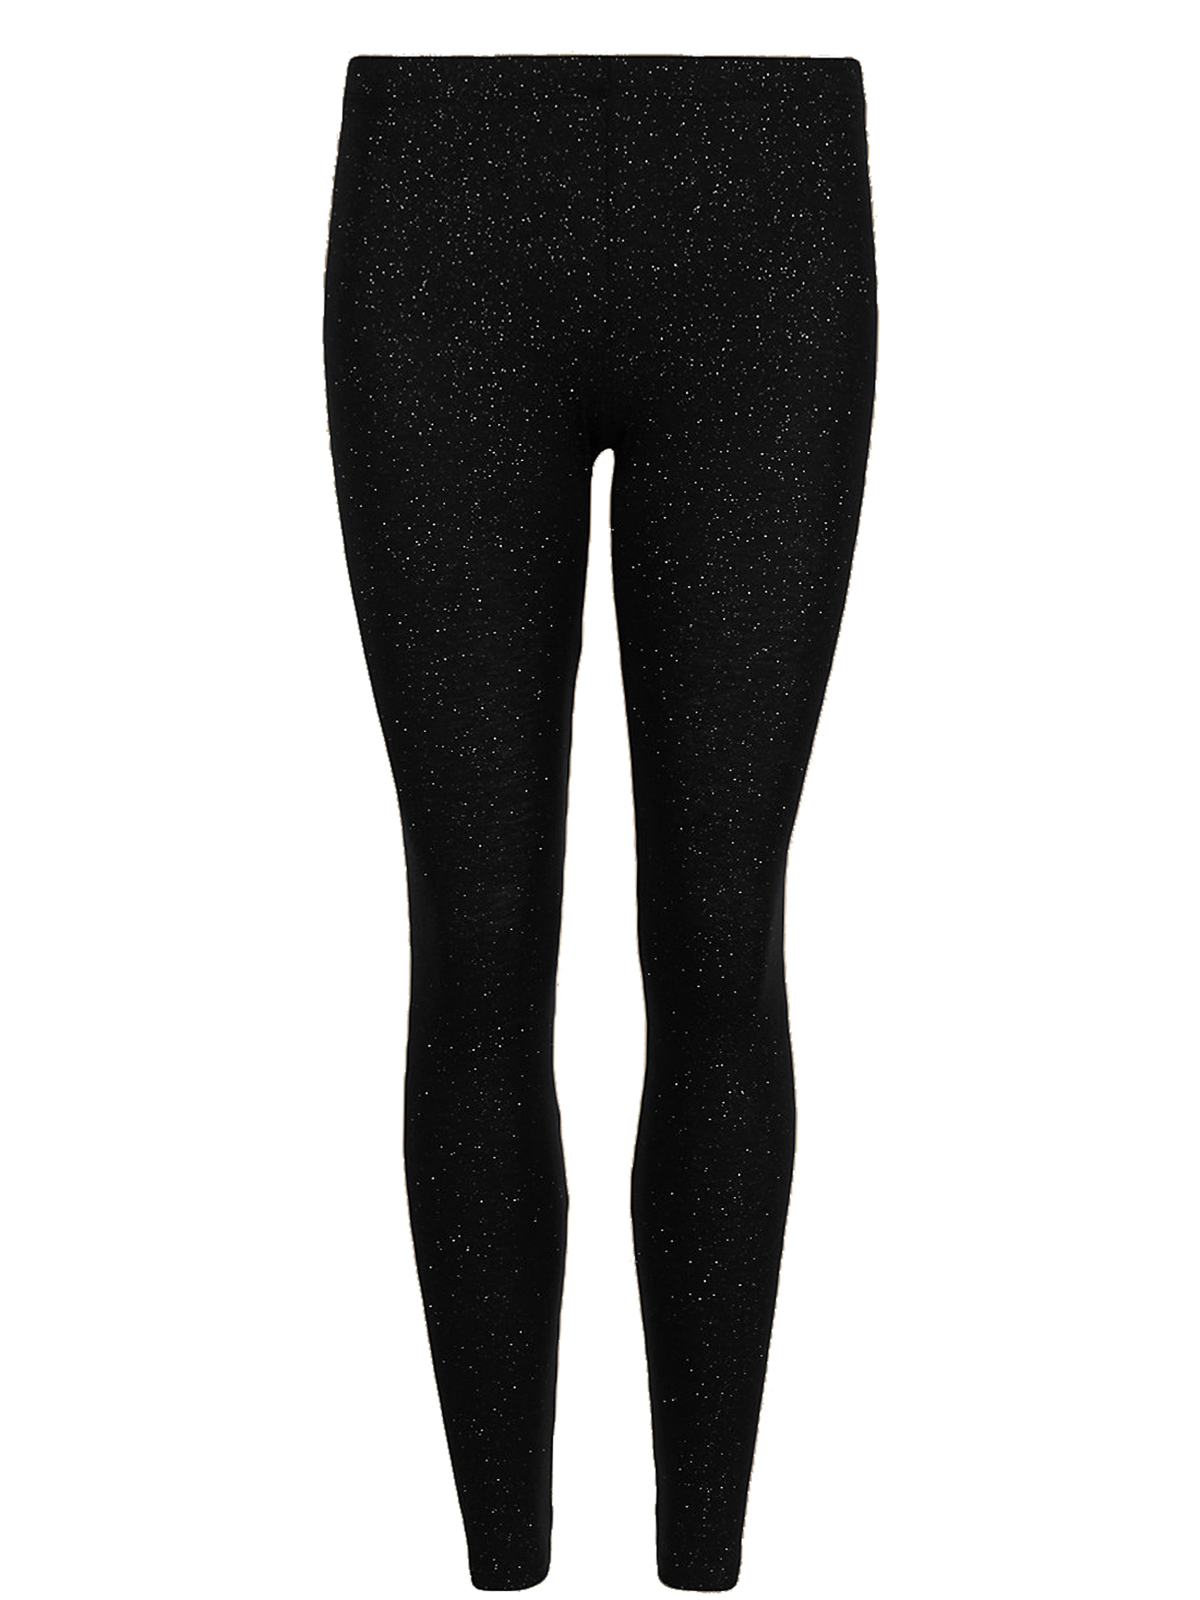 Marks and Spencer - - M&5 ASSORTED Heatgen Leggings - Size 8 to 16